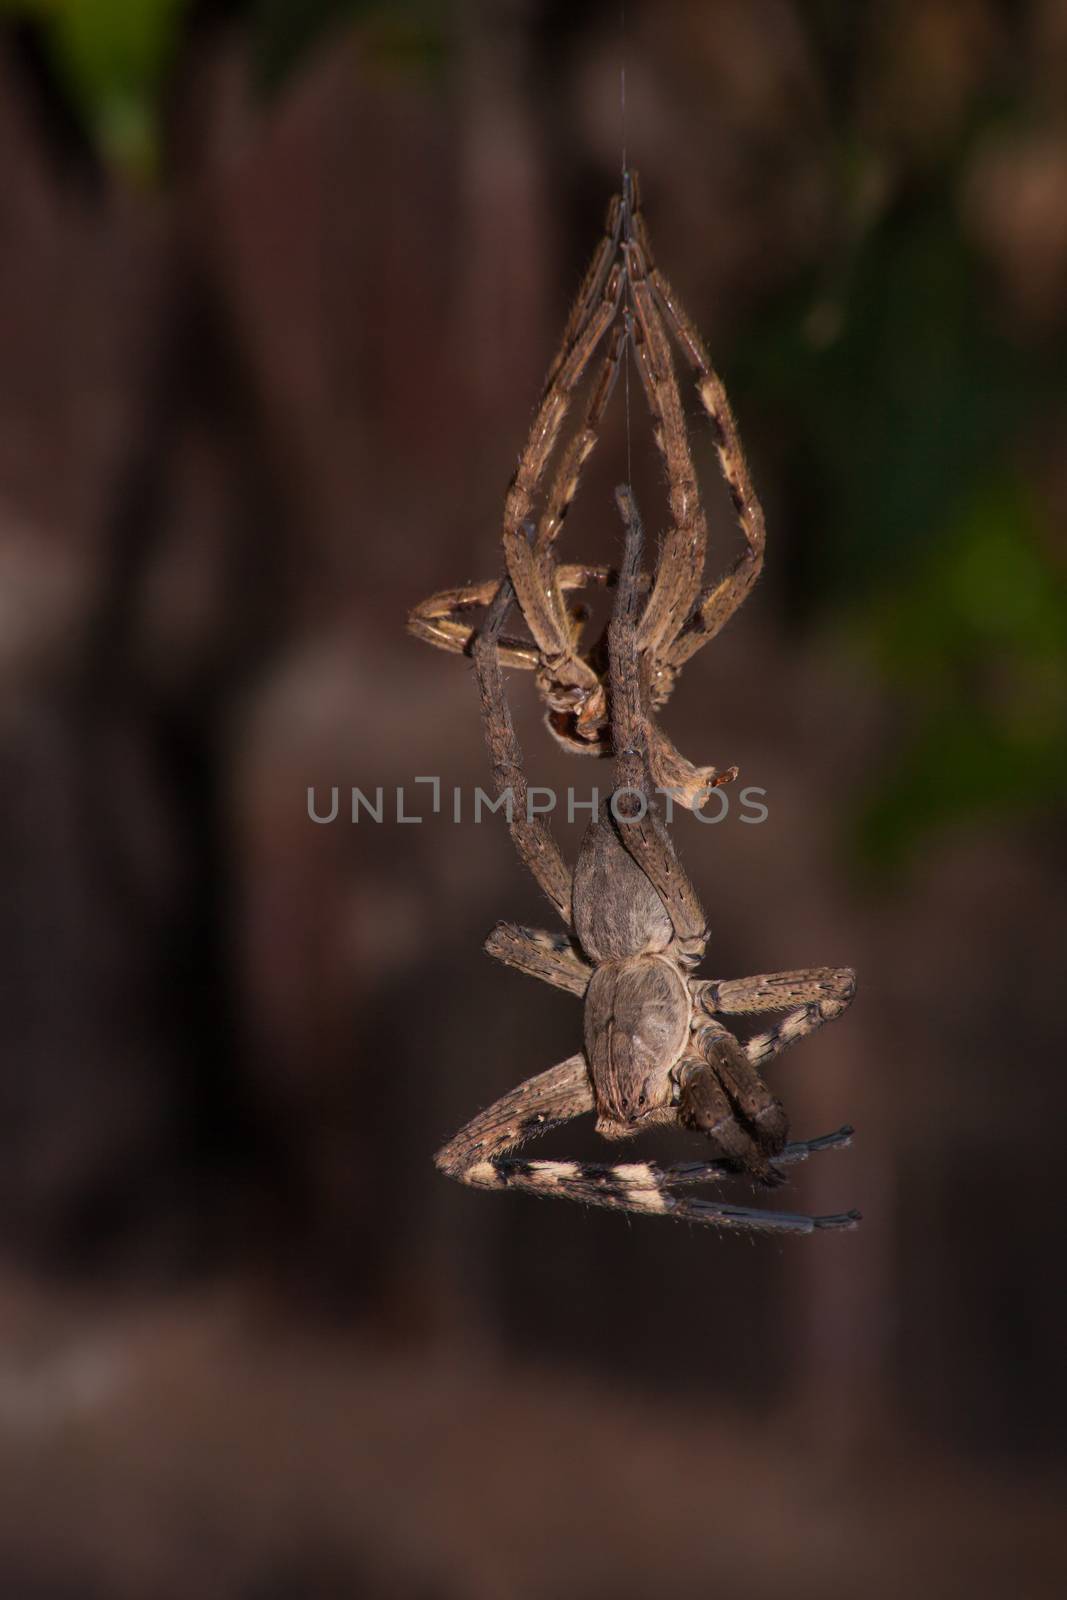 Rain Spider (Palystes superciliosus) in the process of moulting